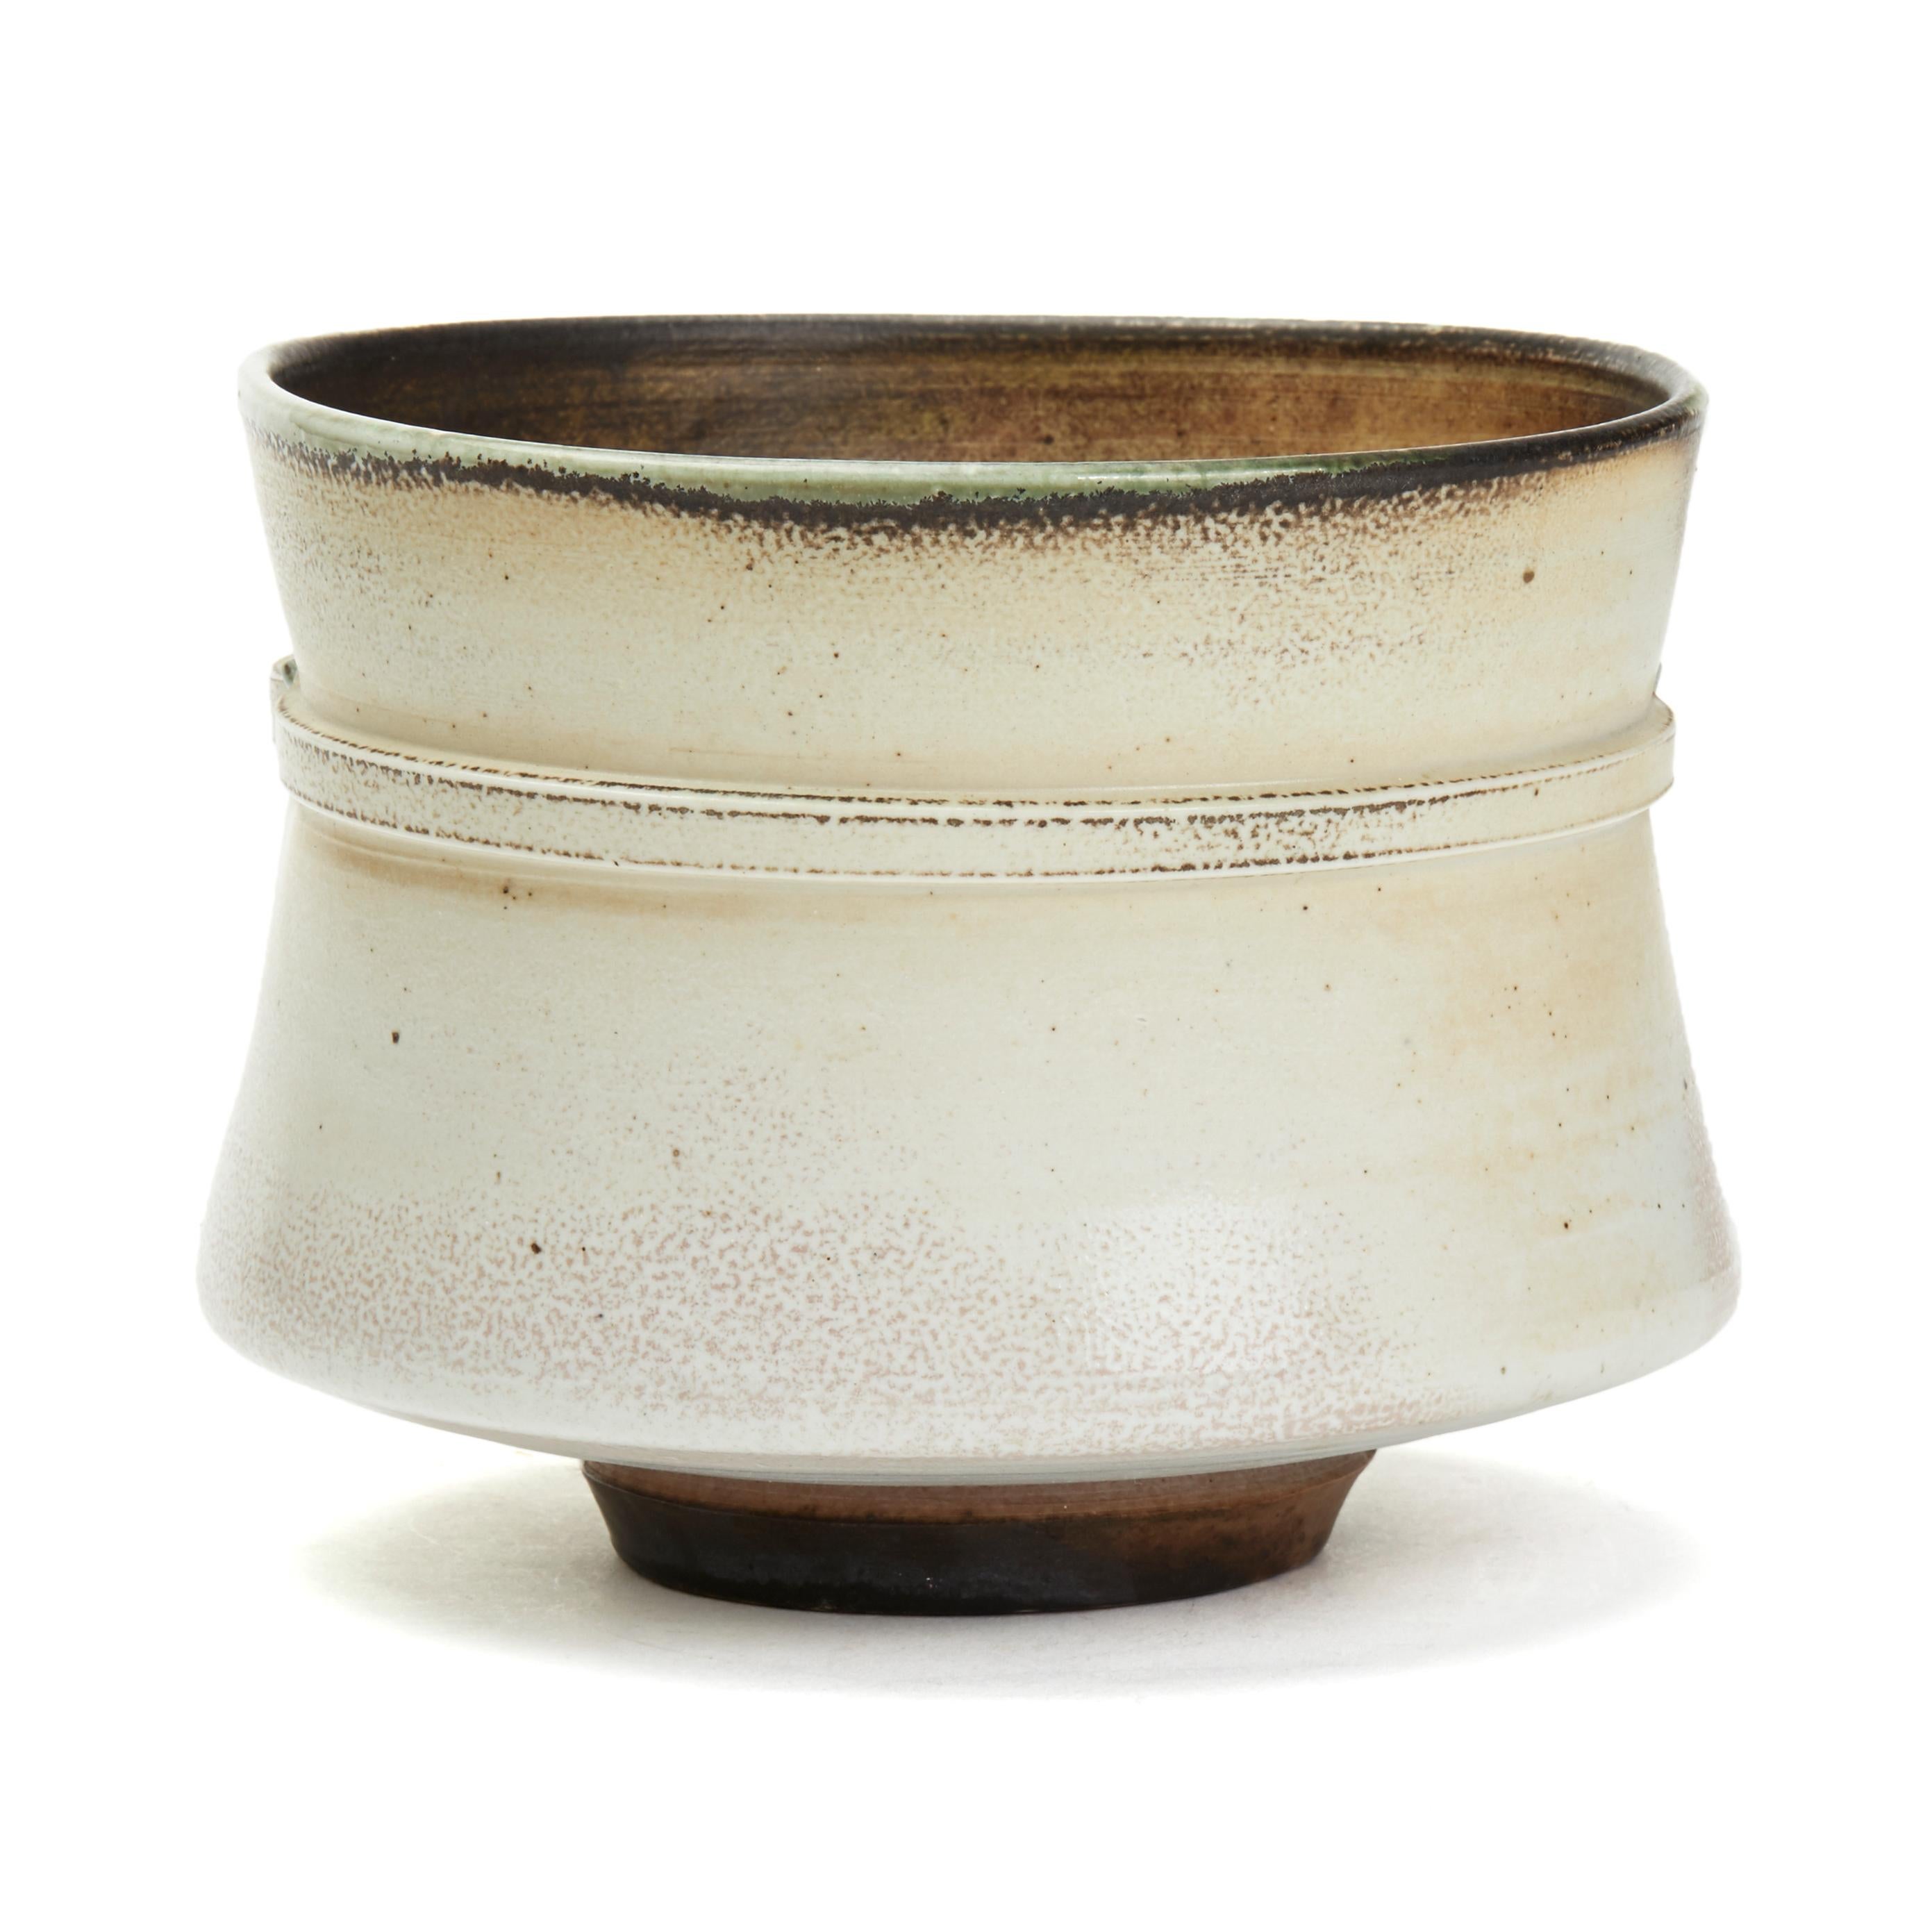 A stylish Studio Pottery porcelain strapped and pinched vessel wide rounded form by renowned Irish potter Jack Doherty (b. 1948). The rounded cylindrical shaped vessel has a moulded strap applied around the upper body with two 'impressed' studs to